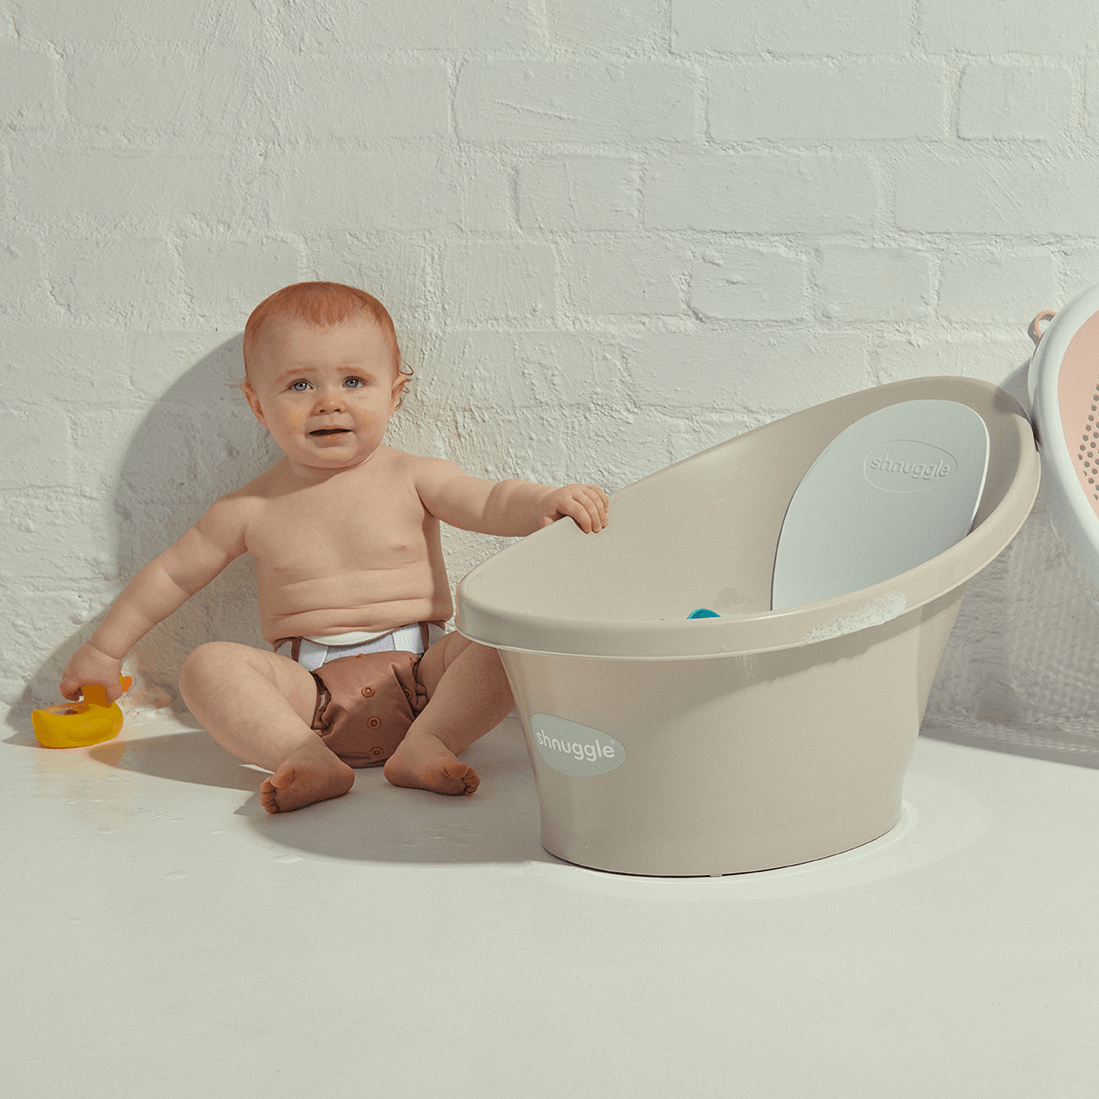 An Honest Guide On How Often To Bathe Baby